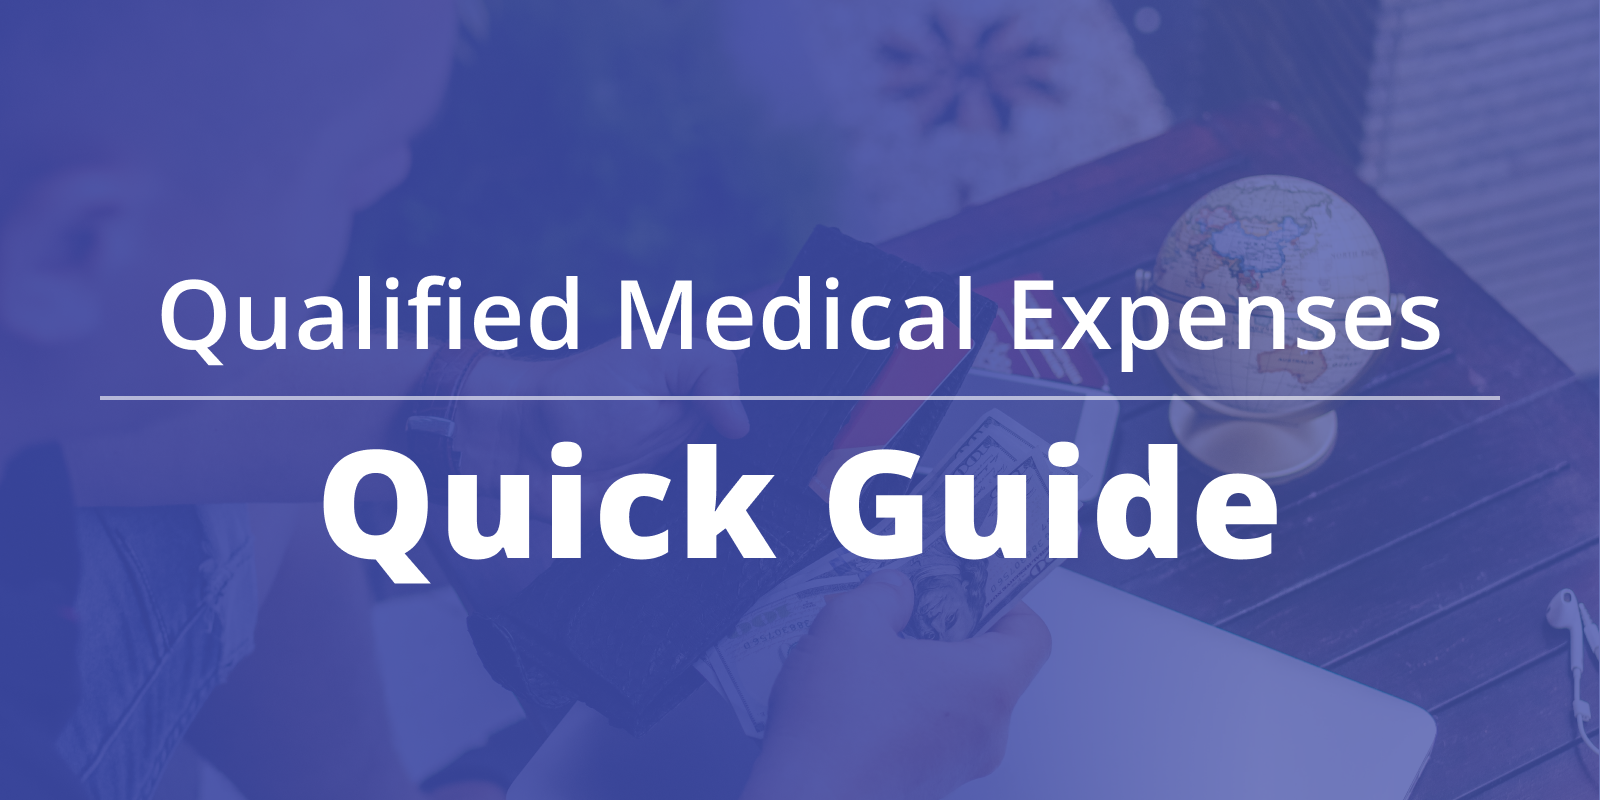 Your Quick Guide to Qualified Medical Expenses